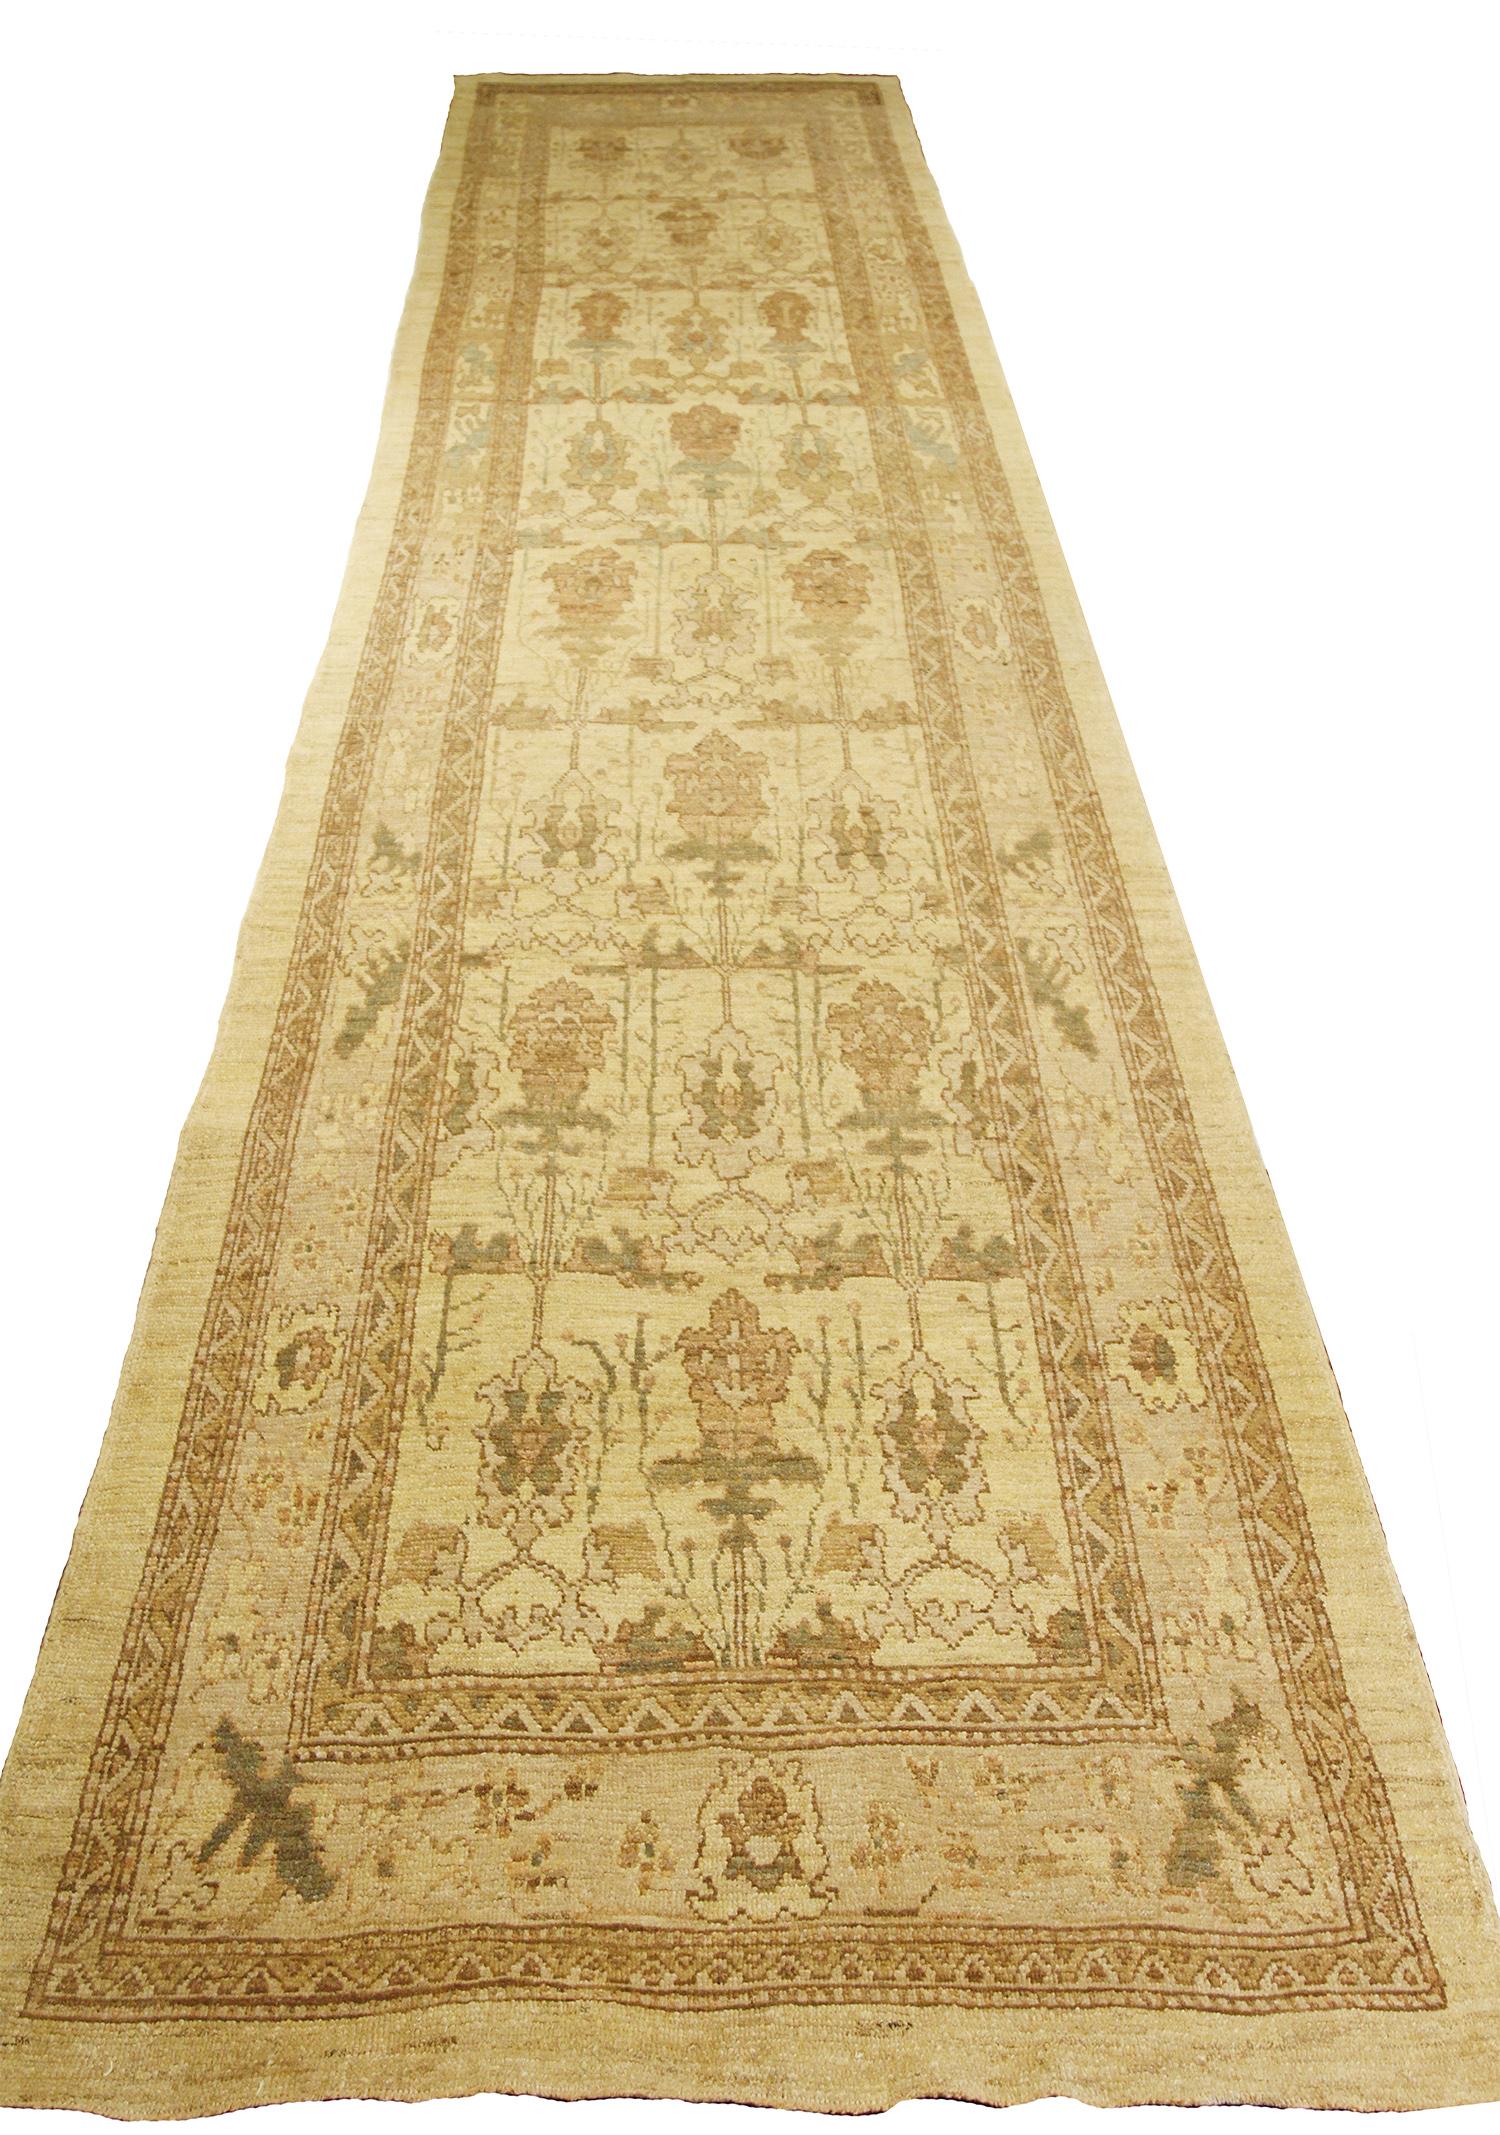 Contemporary Turkish runner rug made of handwoven sheep’s wool of the finest quality. It’s colored with organic vegetable dyes that are certified safe for humans and pets alike. It features rows of flower details all-over associated with Oushak